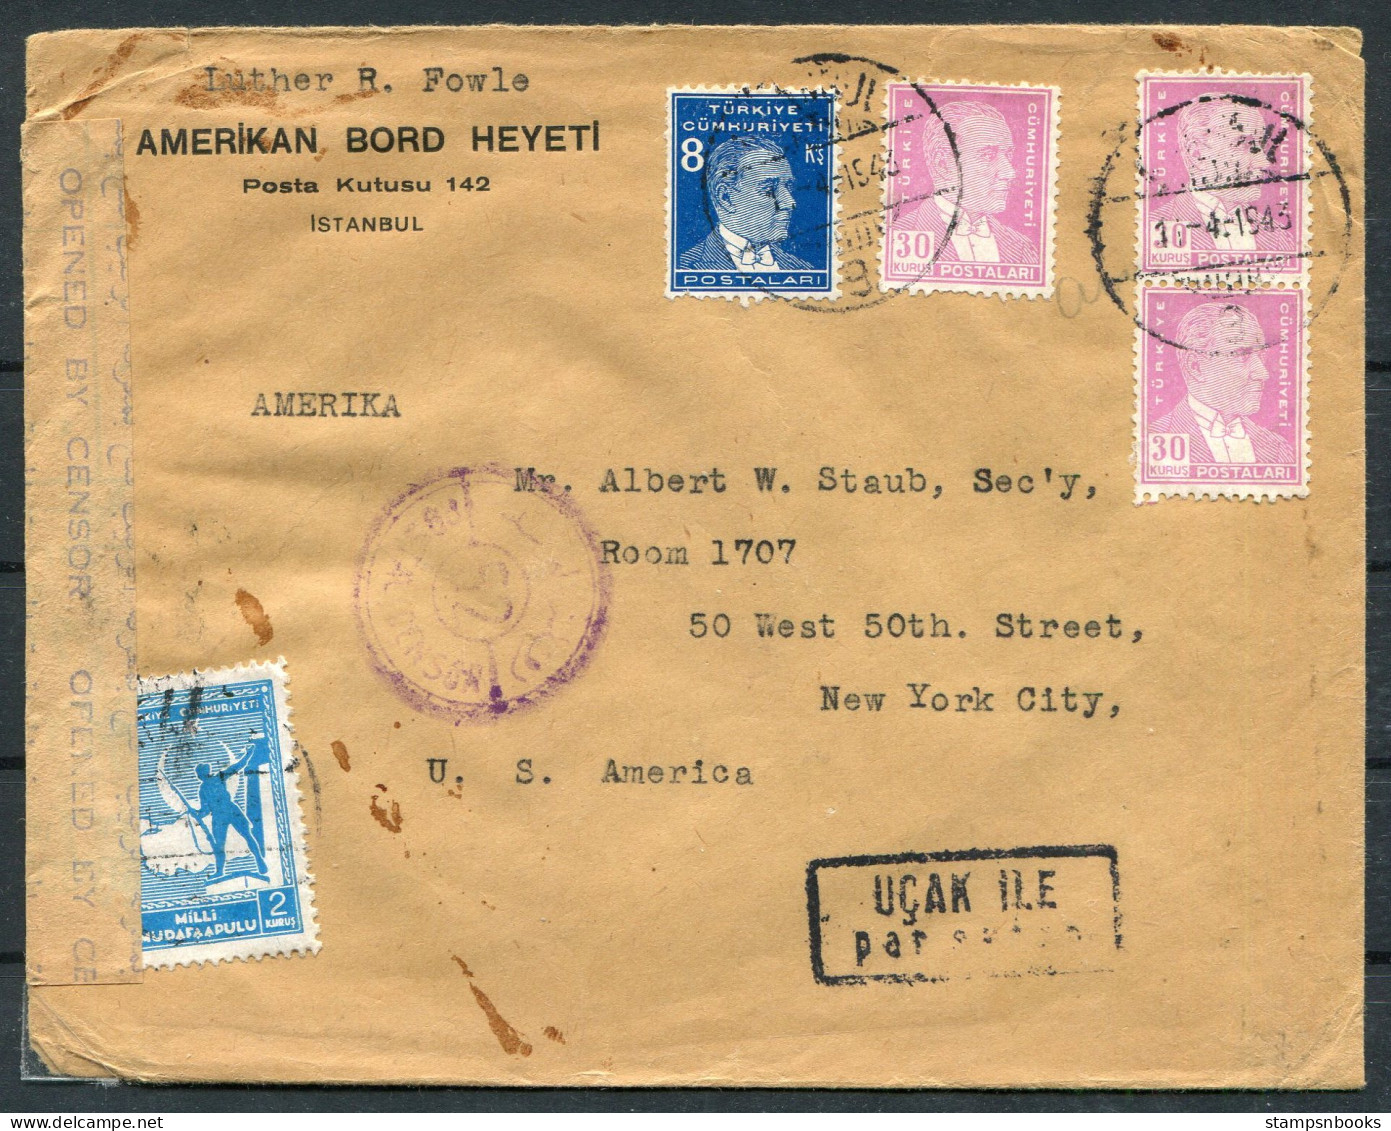 1943 Turkey Airmail Cover, Luther R Fowle, Amerikan Bord Heyeti Istanbul Mission Censor Cover - New York, USA - Storia Postale